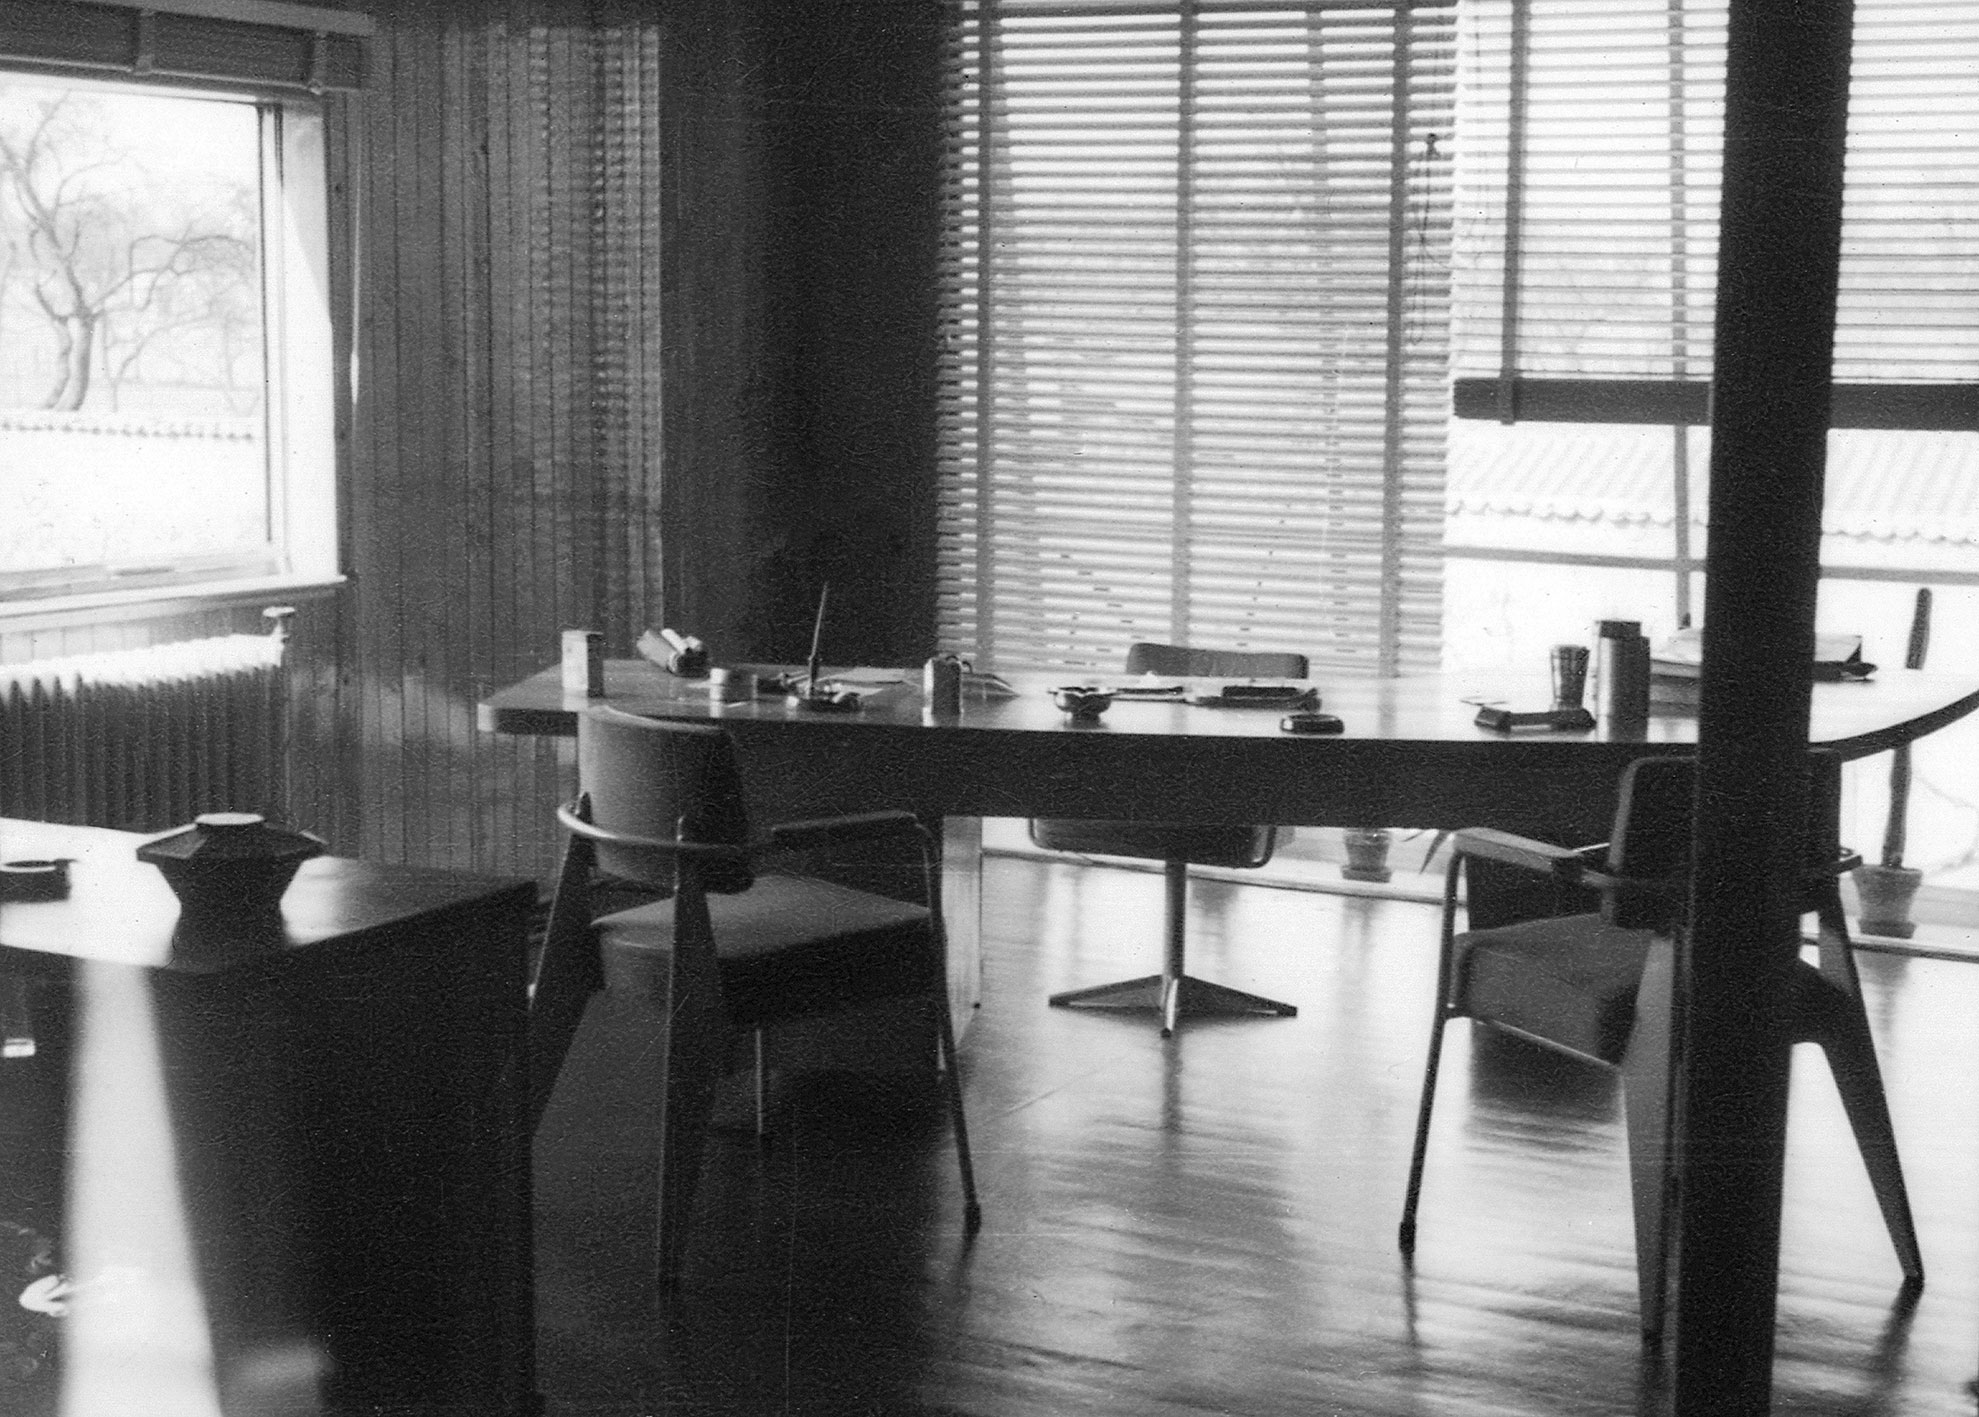 Ferembal factory offices, Nancy, (architect H. Prouvé, 1949). The Director’s office furnished with a Bridge FB 11 office chair, with a Présidence desk, and a FP 11 swiveling office chair.